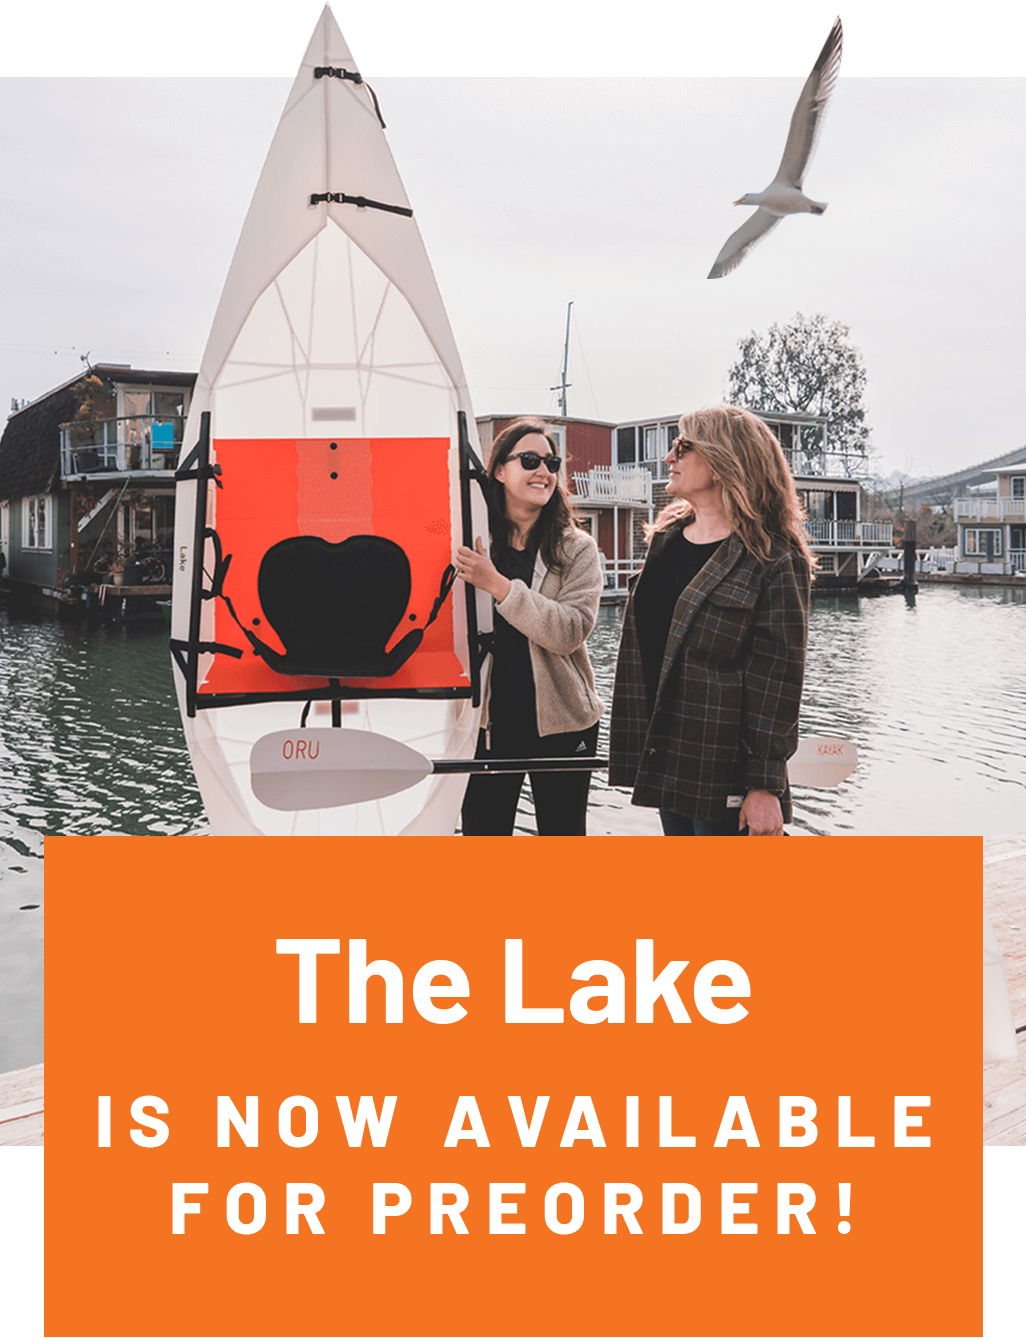 The Lake is now available for preorder!